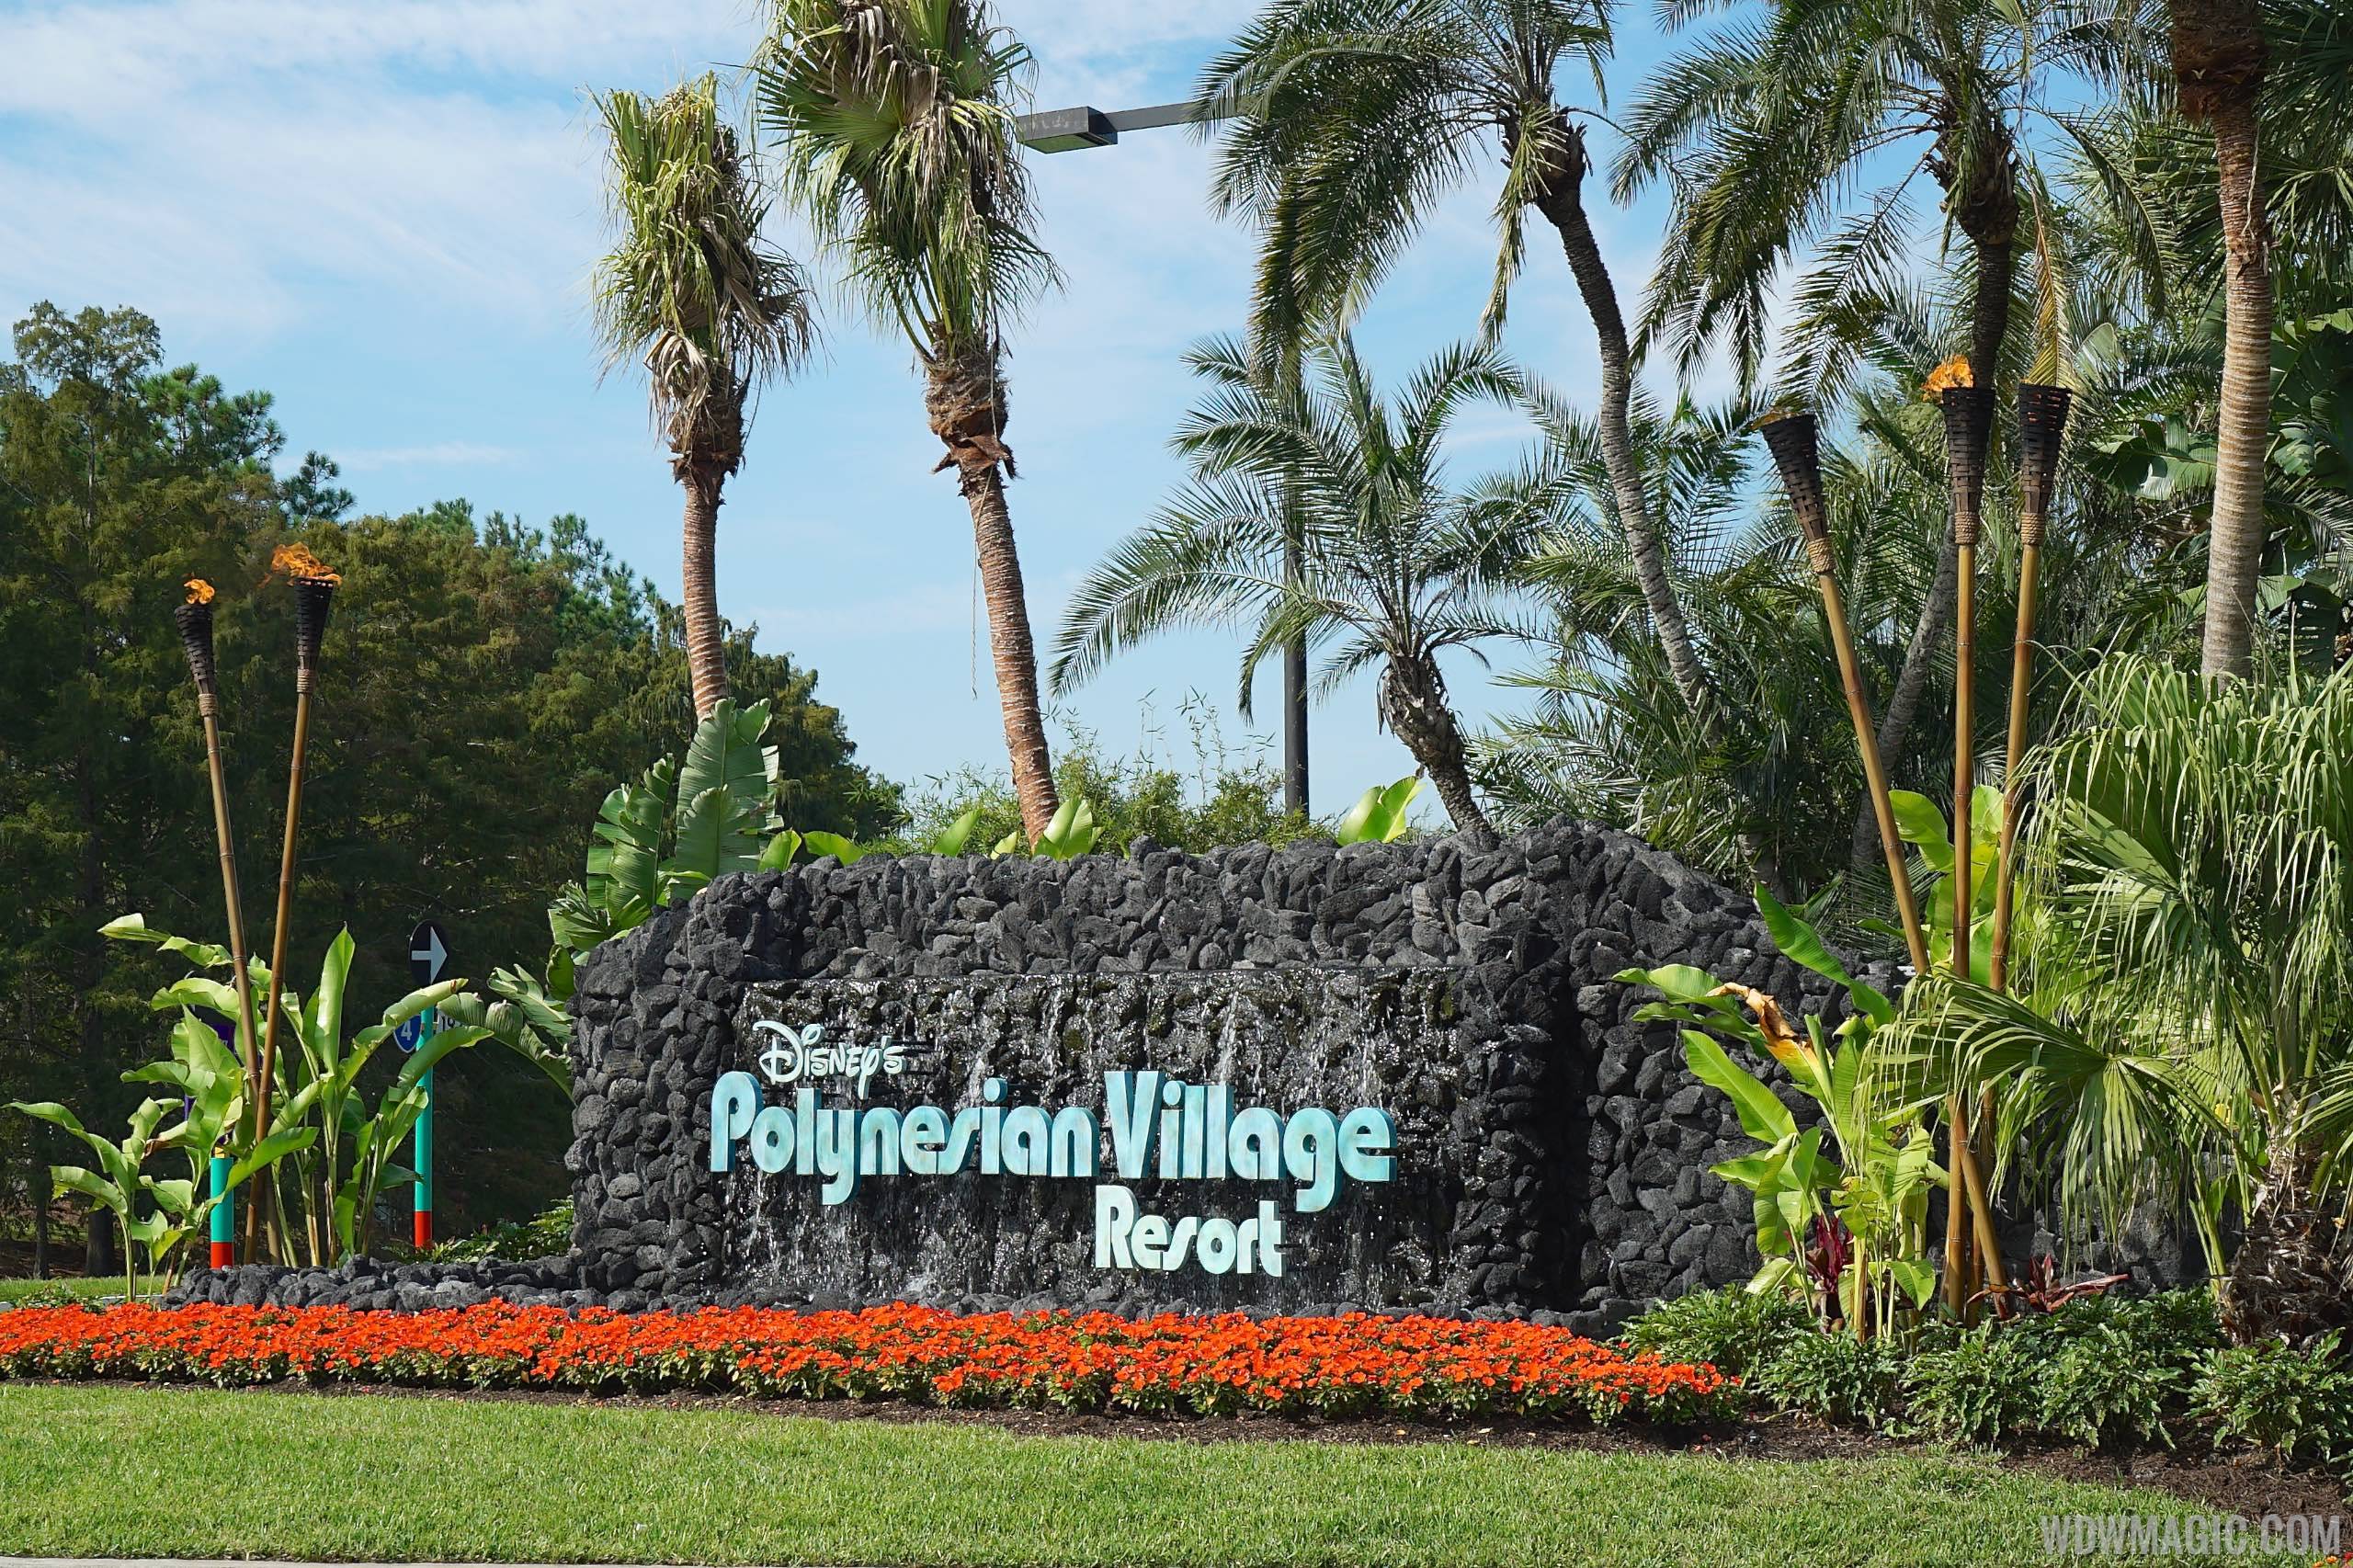 Polynesian Village Resort was planned to reopen October 4 2020